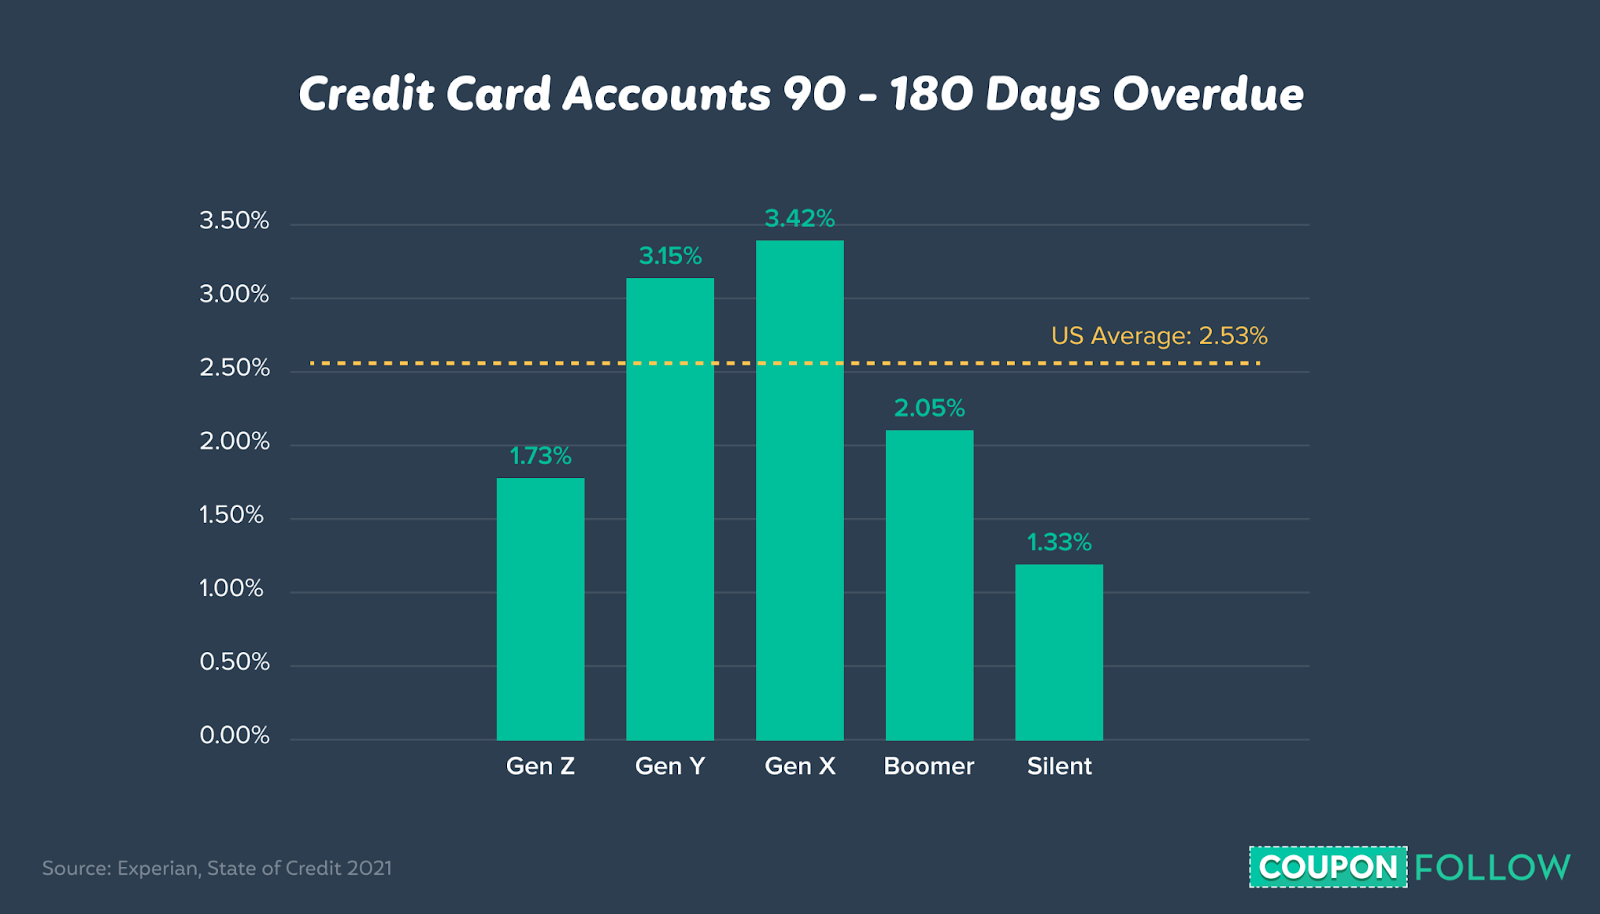 Percent of overdue credit accounts by generation